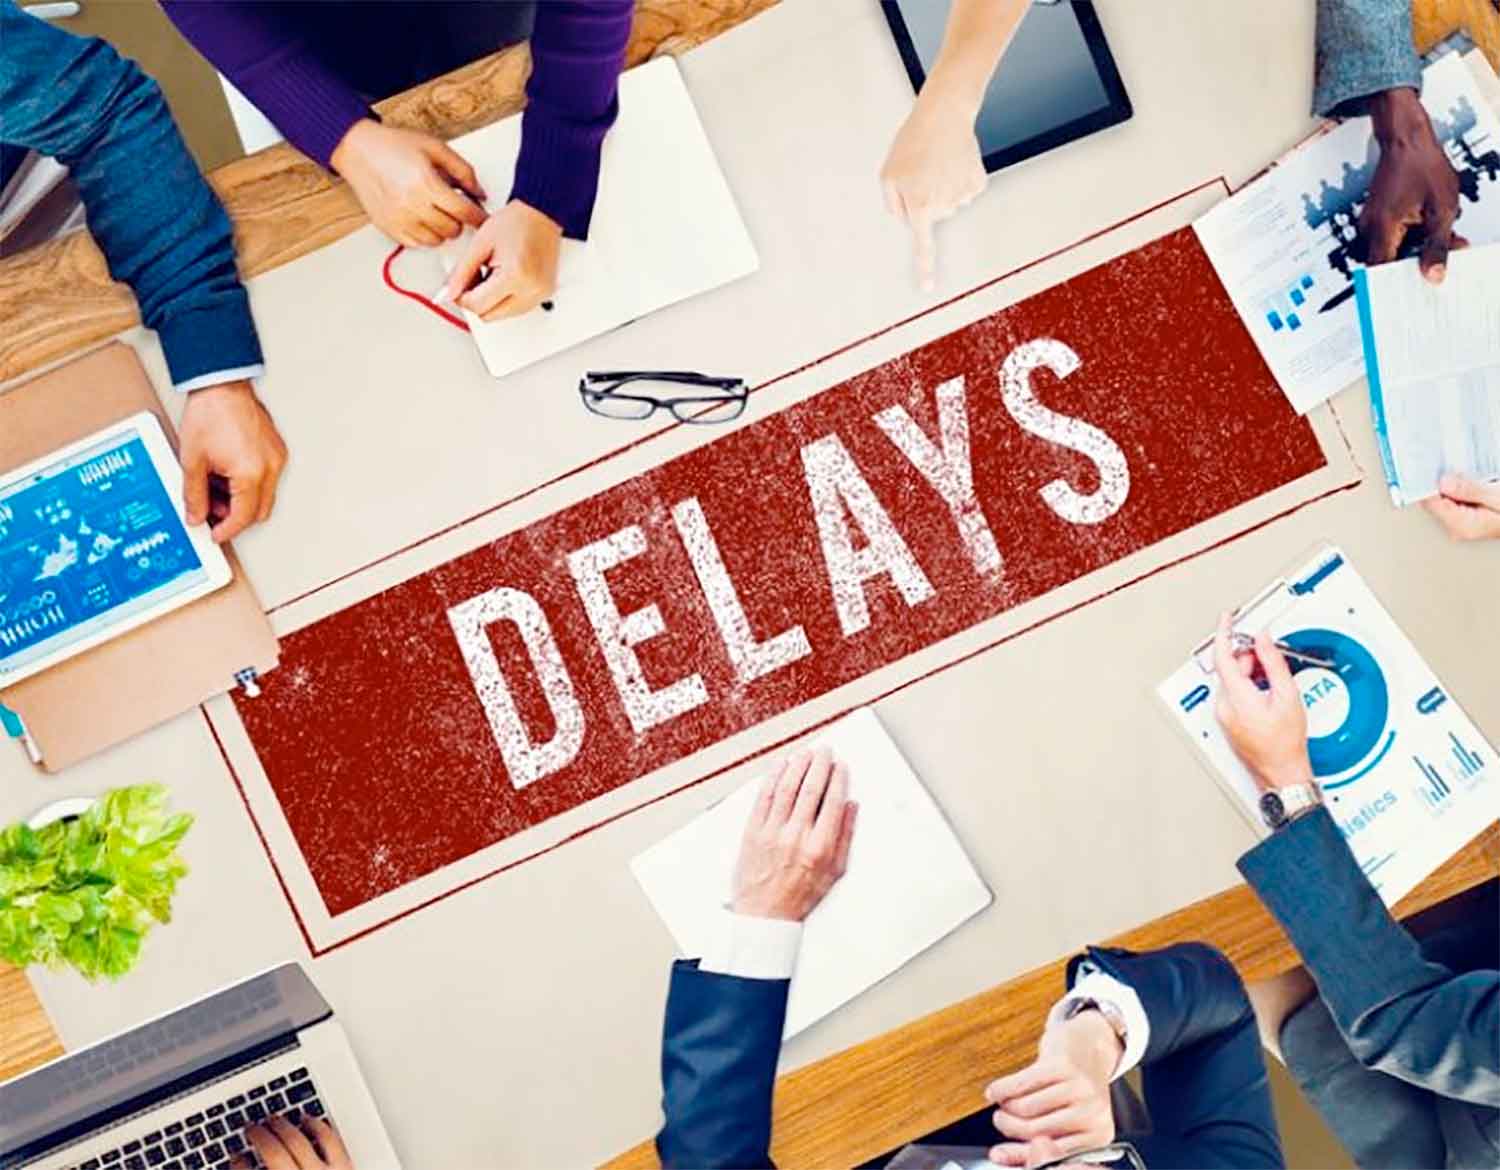 Fixing Production Delays in Business